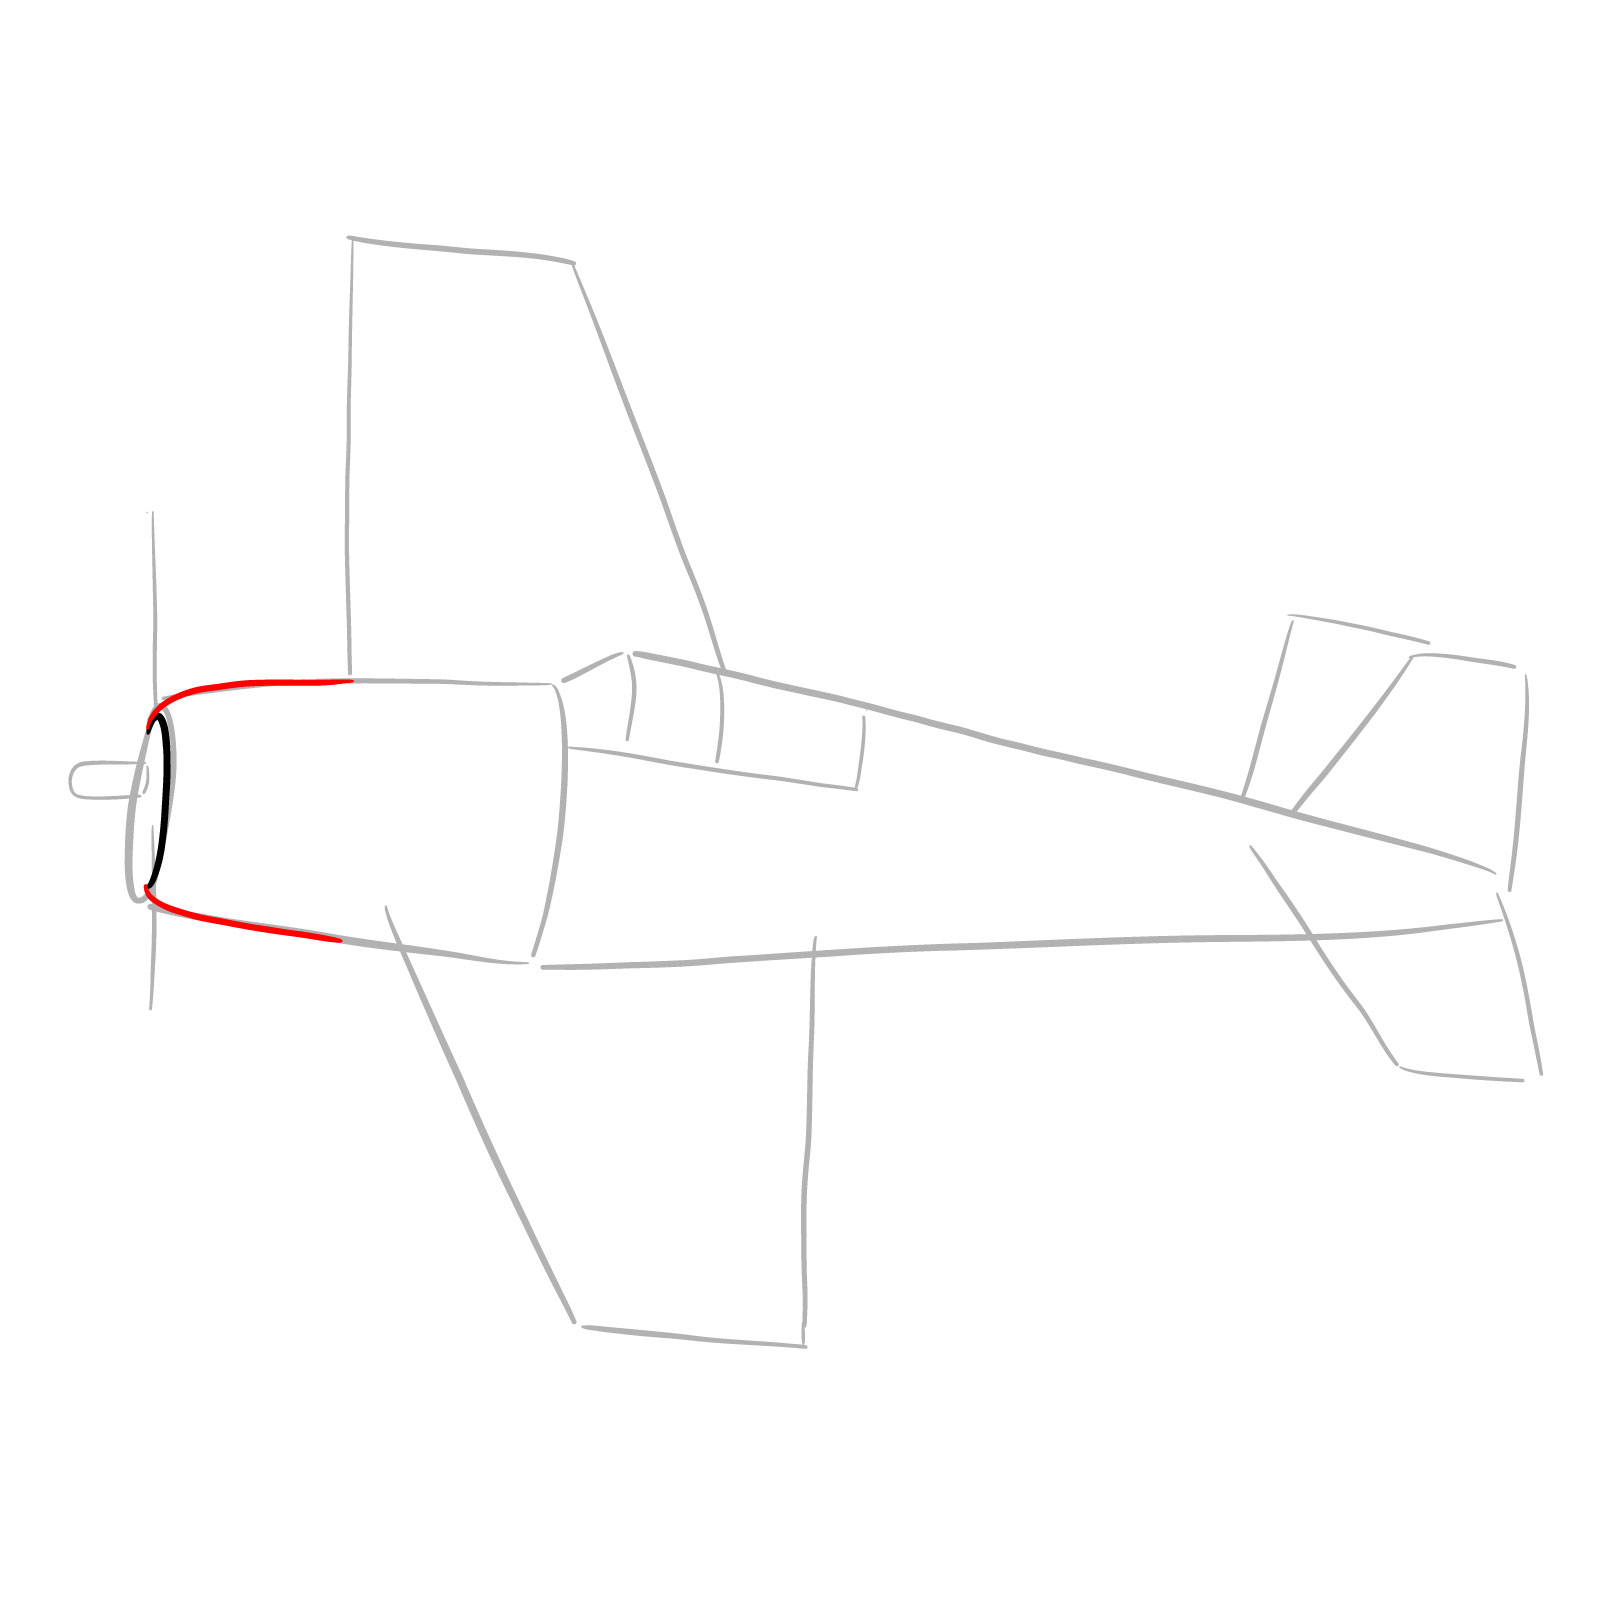 How to draw the F6F-5 Hellcat - step 05